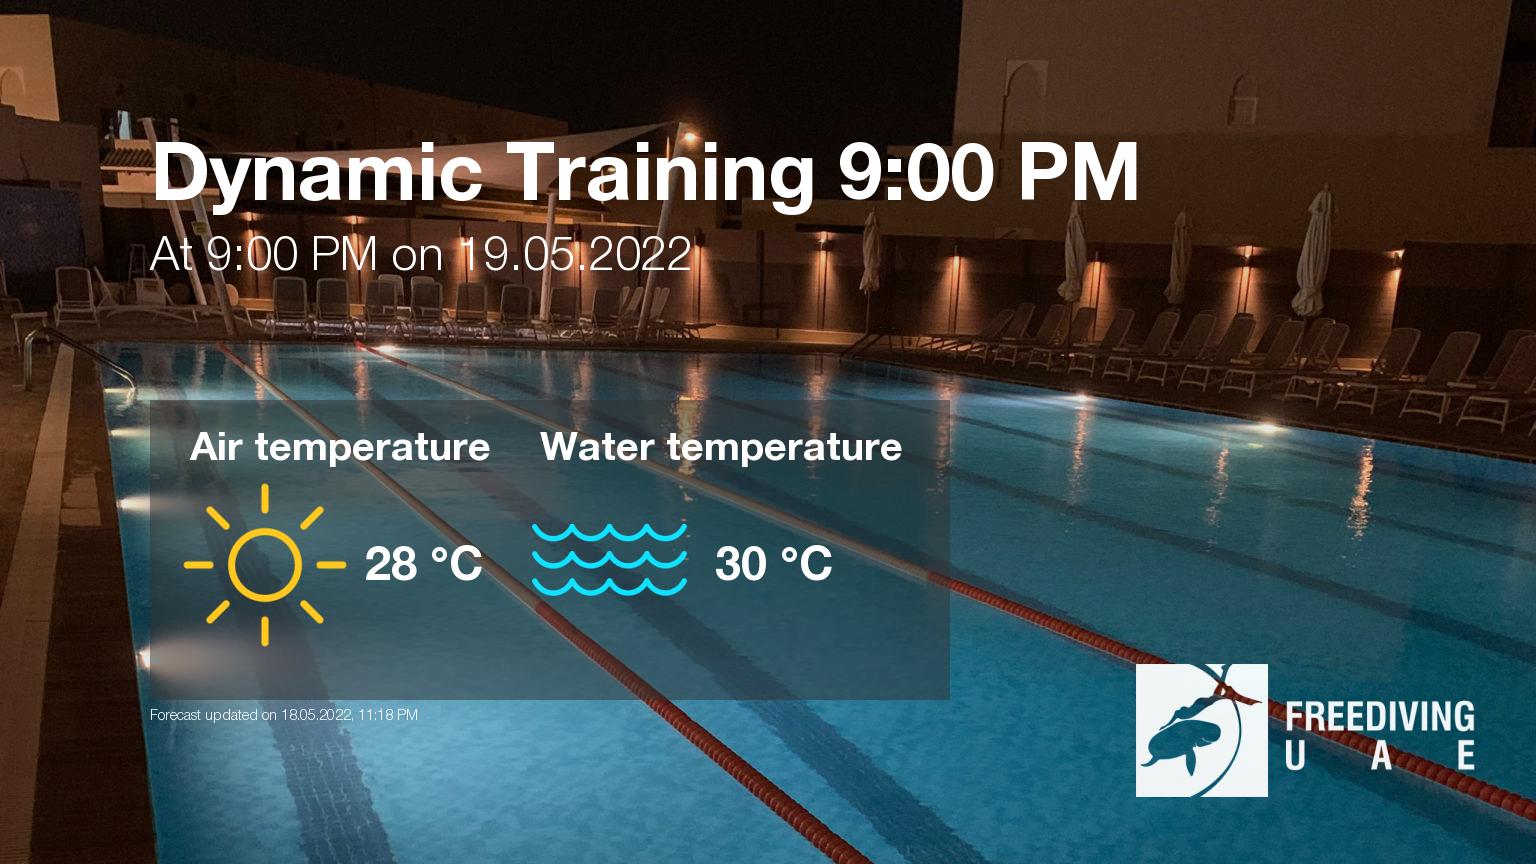 Expected weather during Dynamic Training 9:00 PM on Thu, May 19, at 9:00 PM